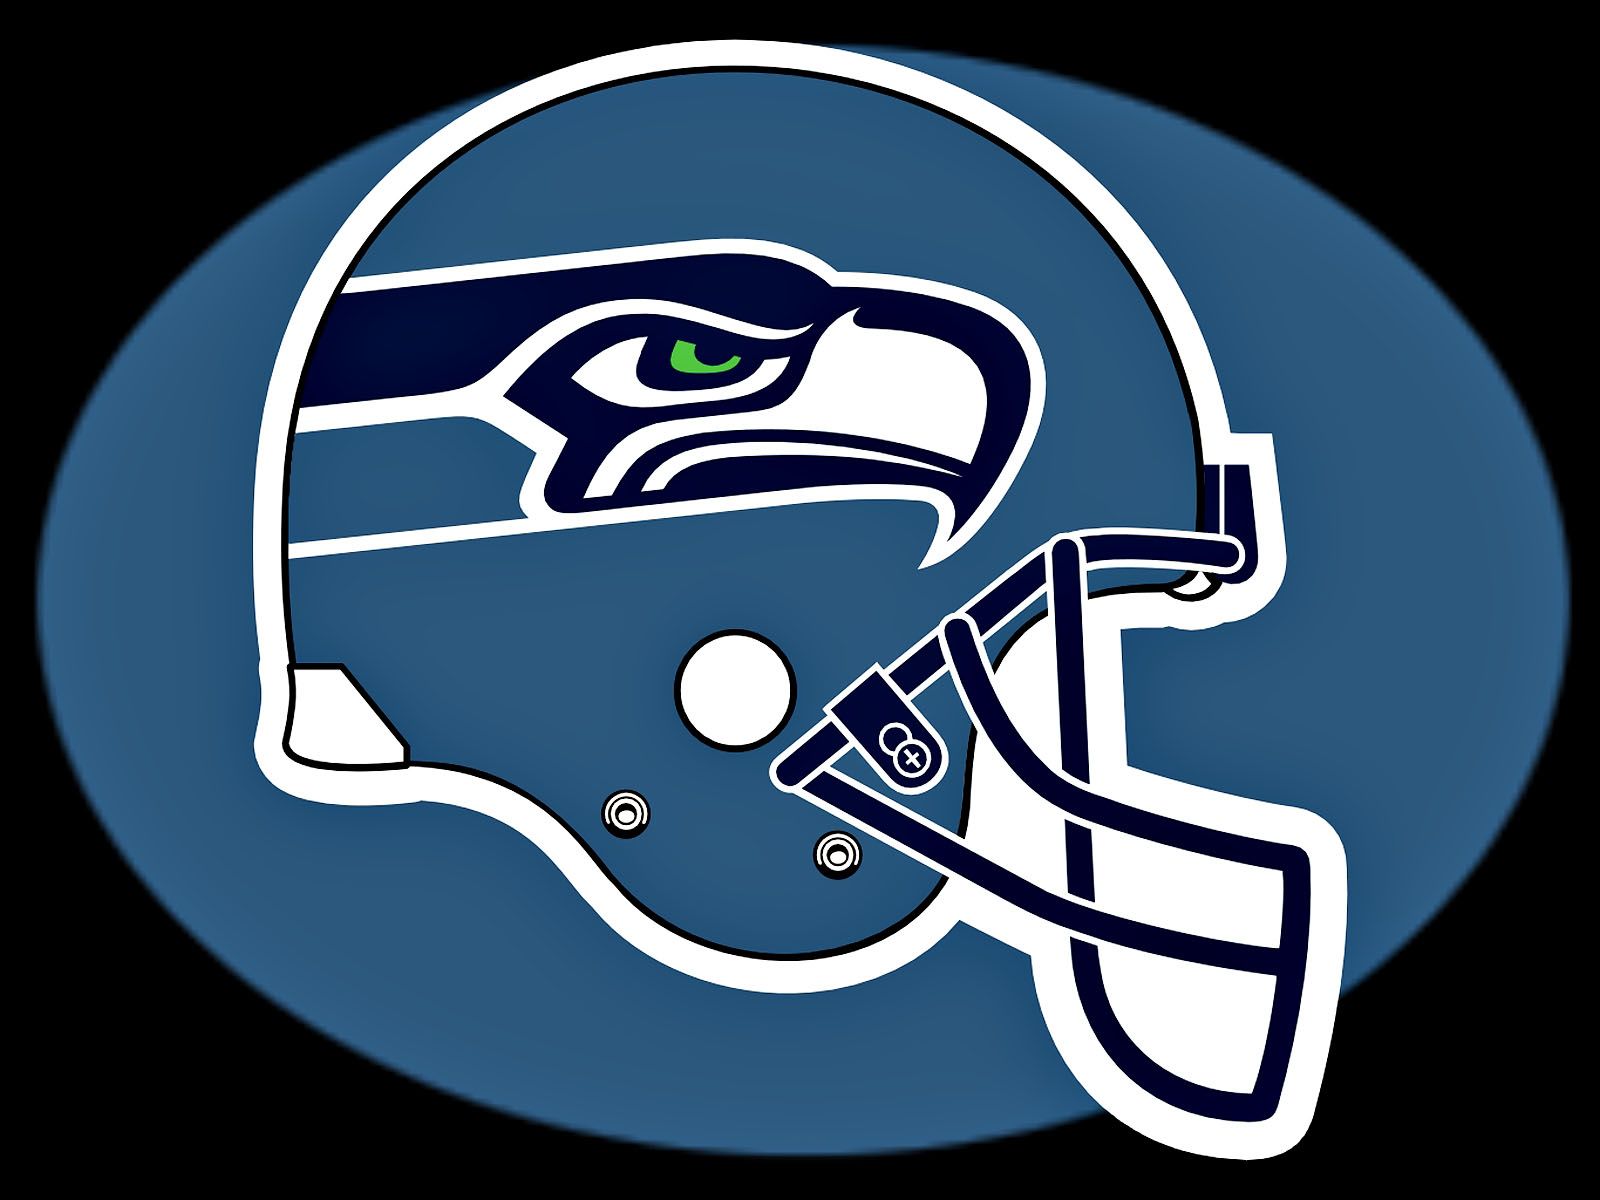 Seahawks Pictures Wallpaper HD